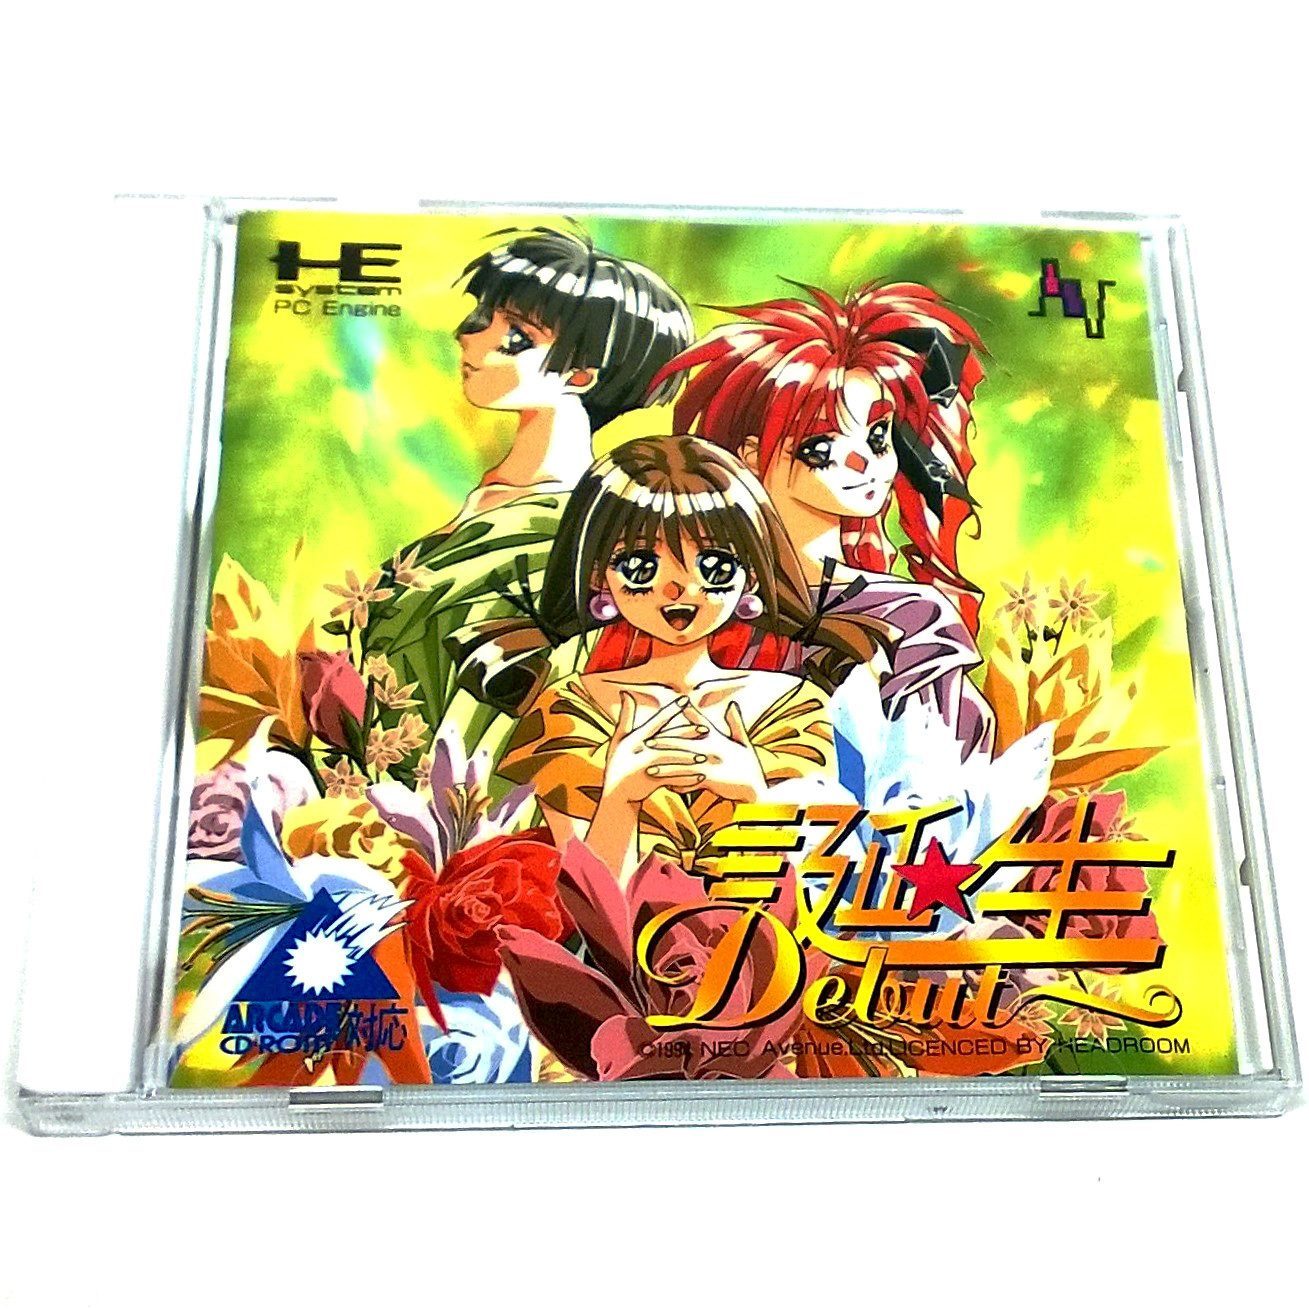 Tanjou Debut for PC Engine - Front of case